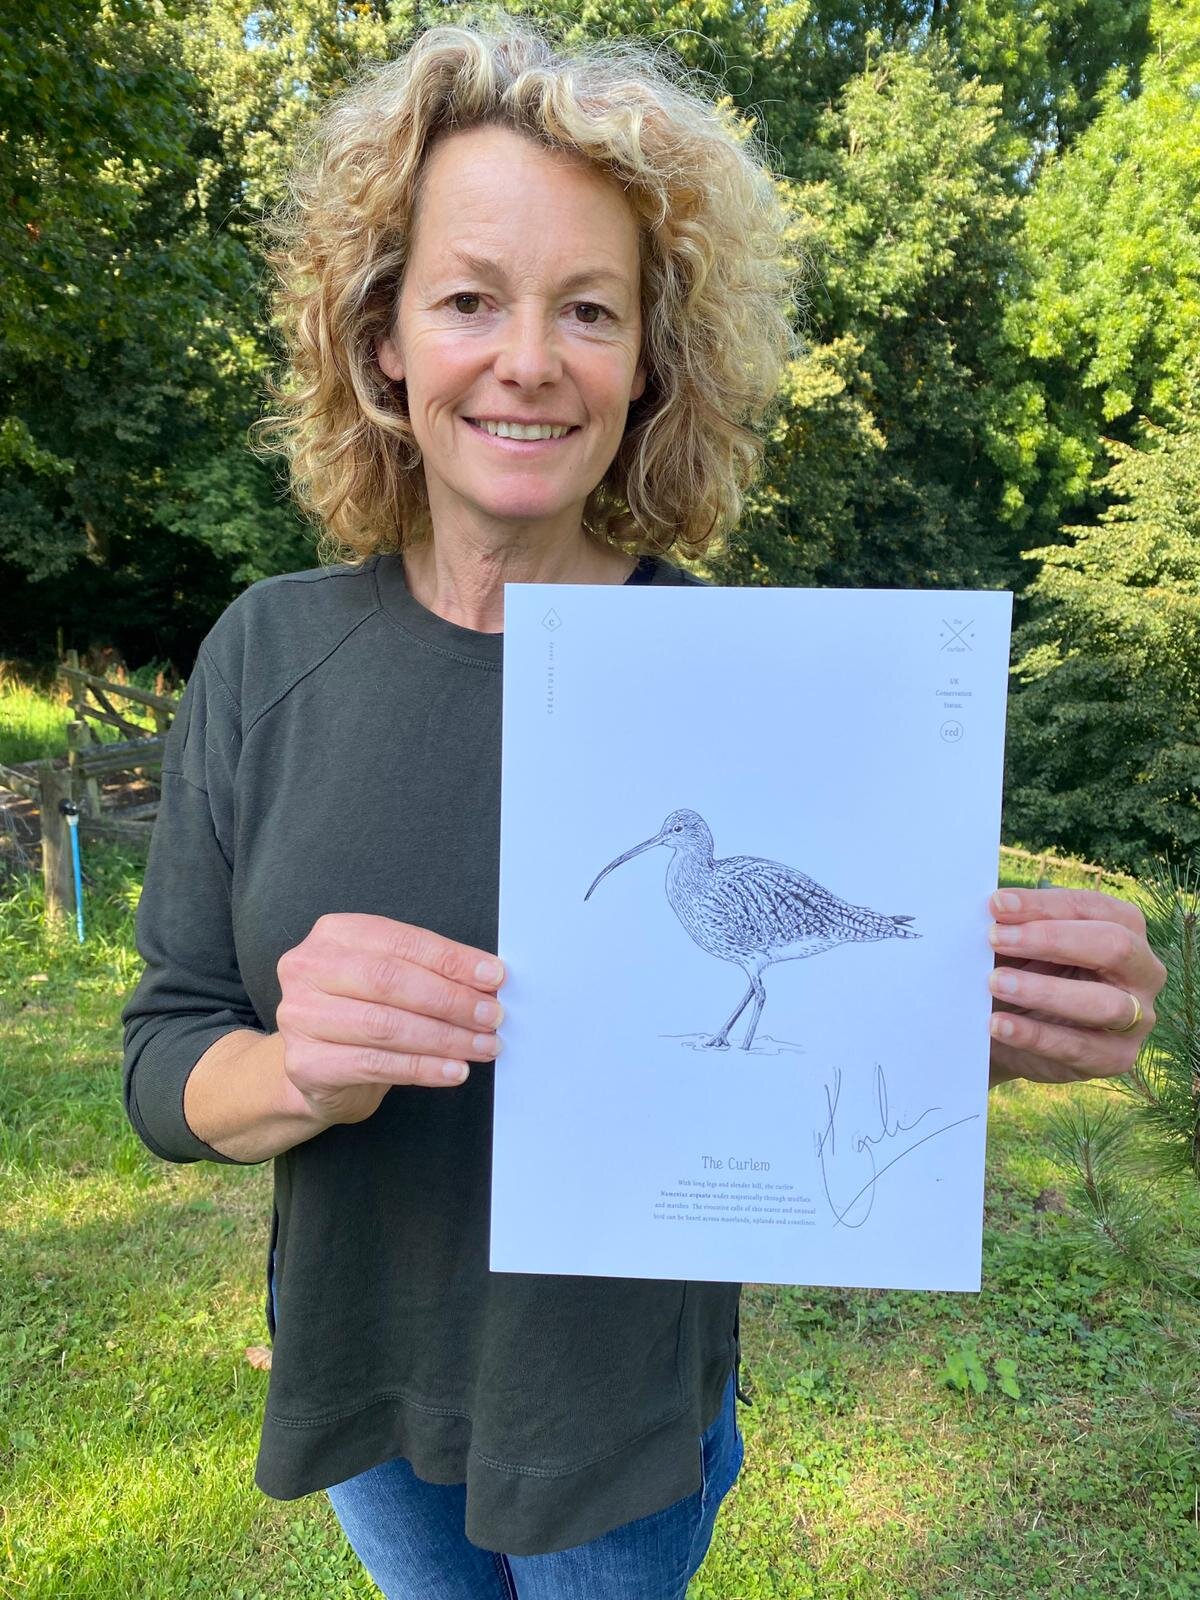 Kate Humble signed curlew print.jpg